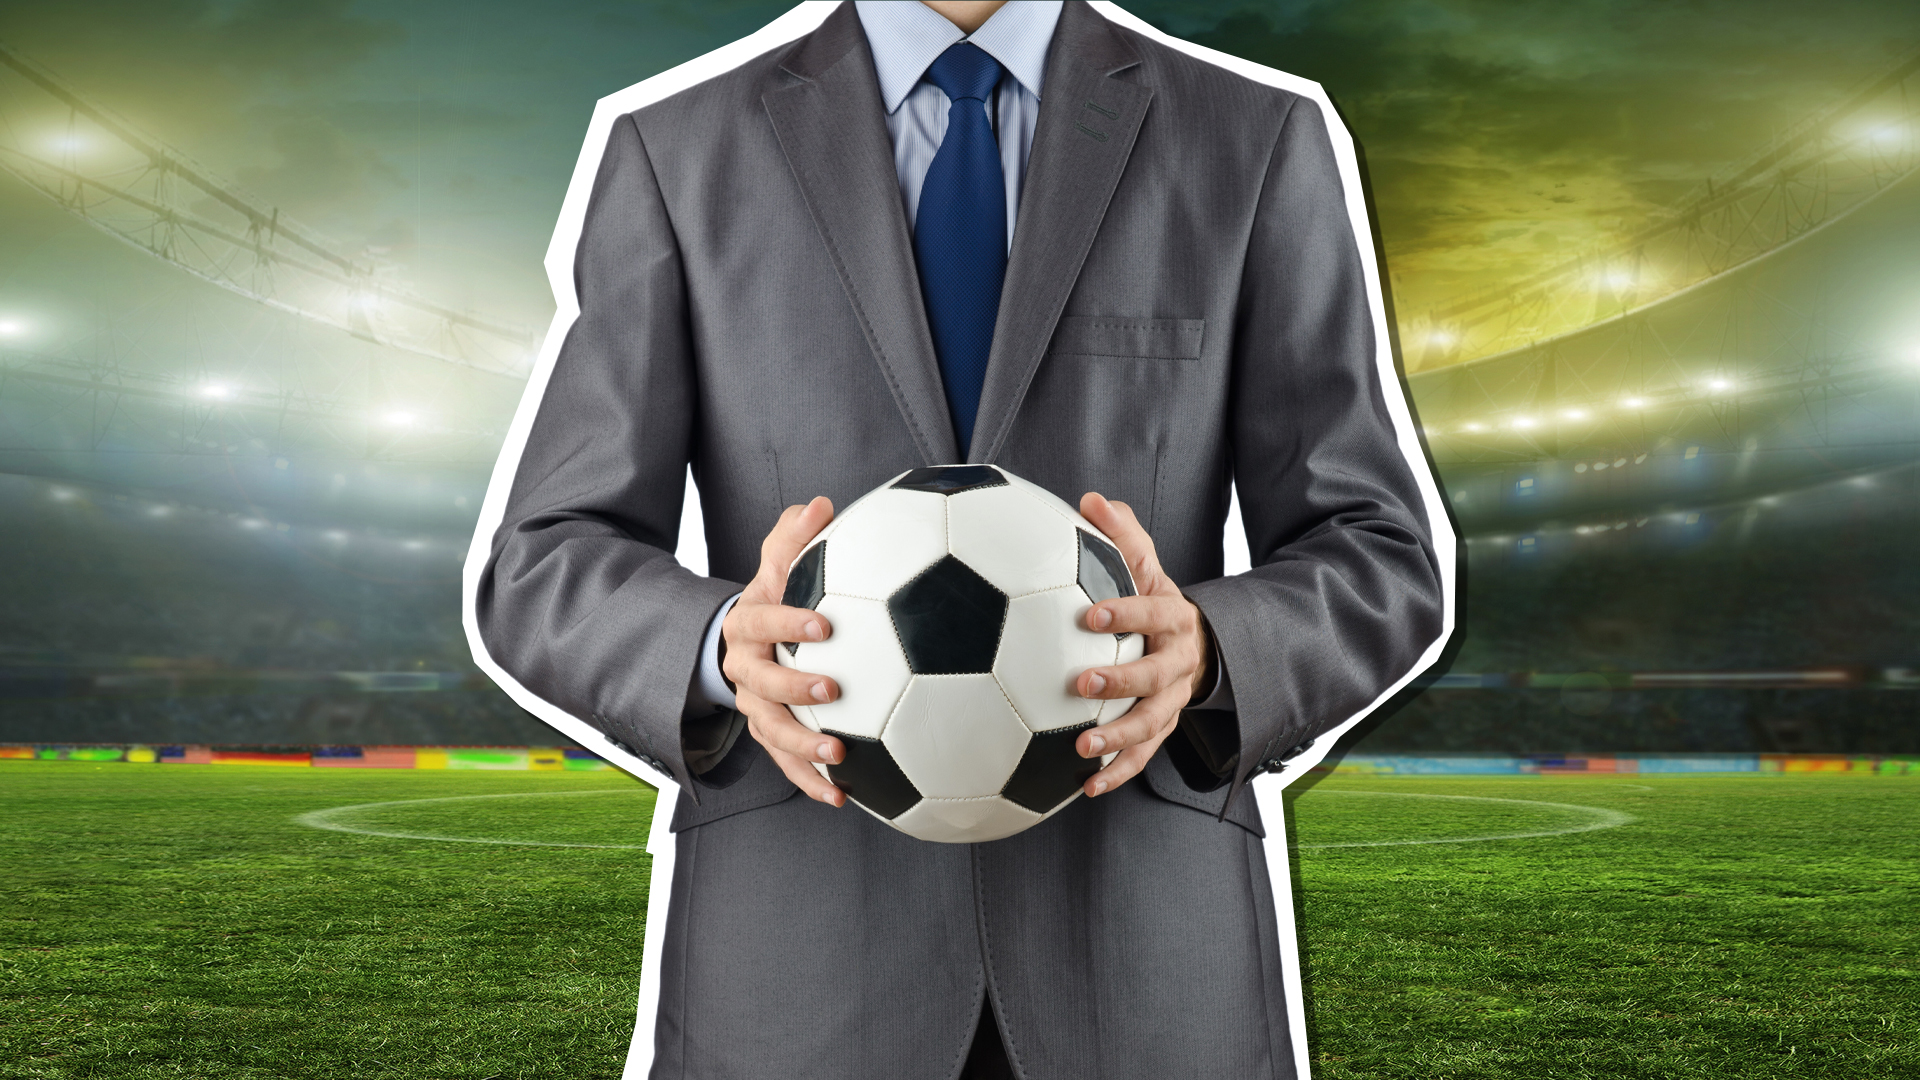 A football manager holding a ball